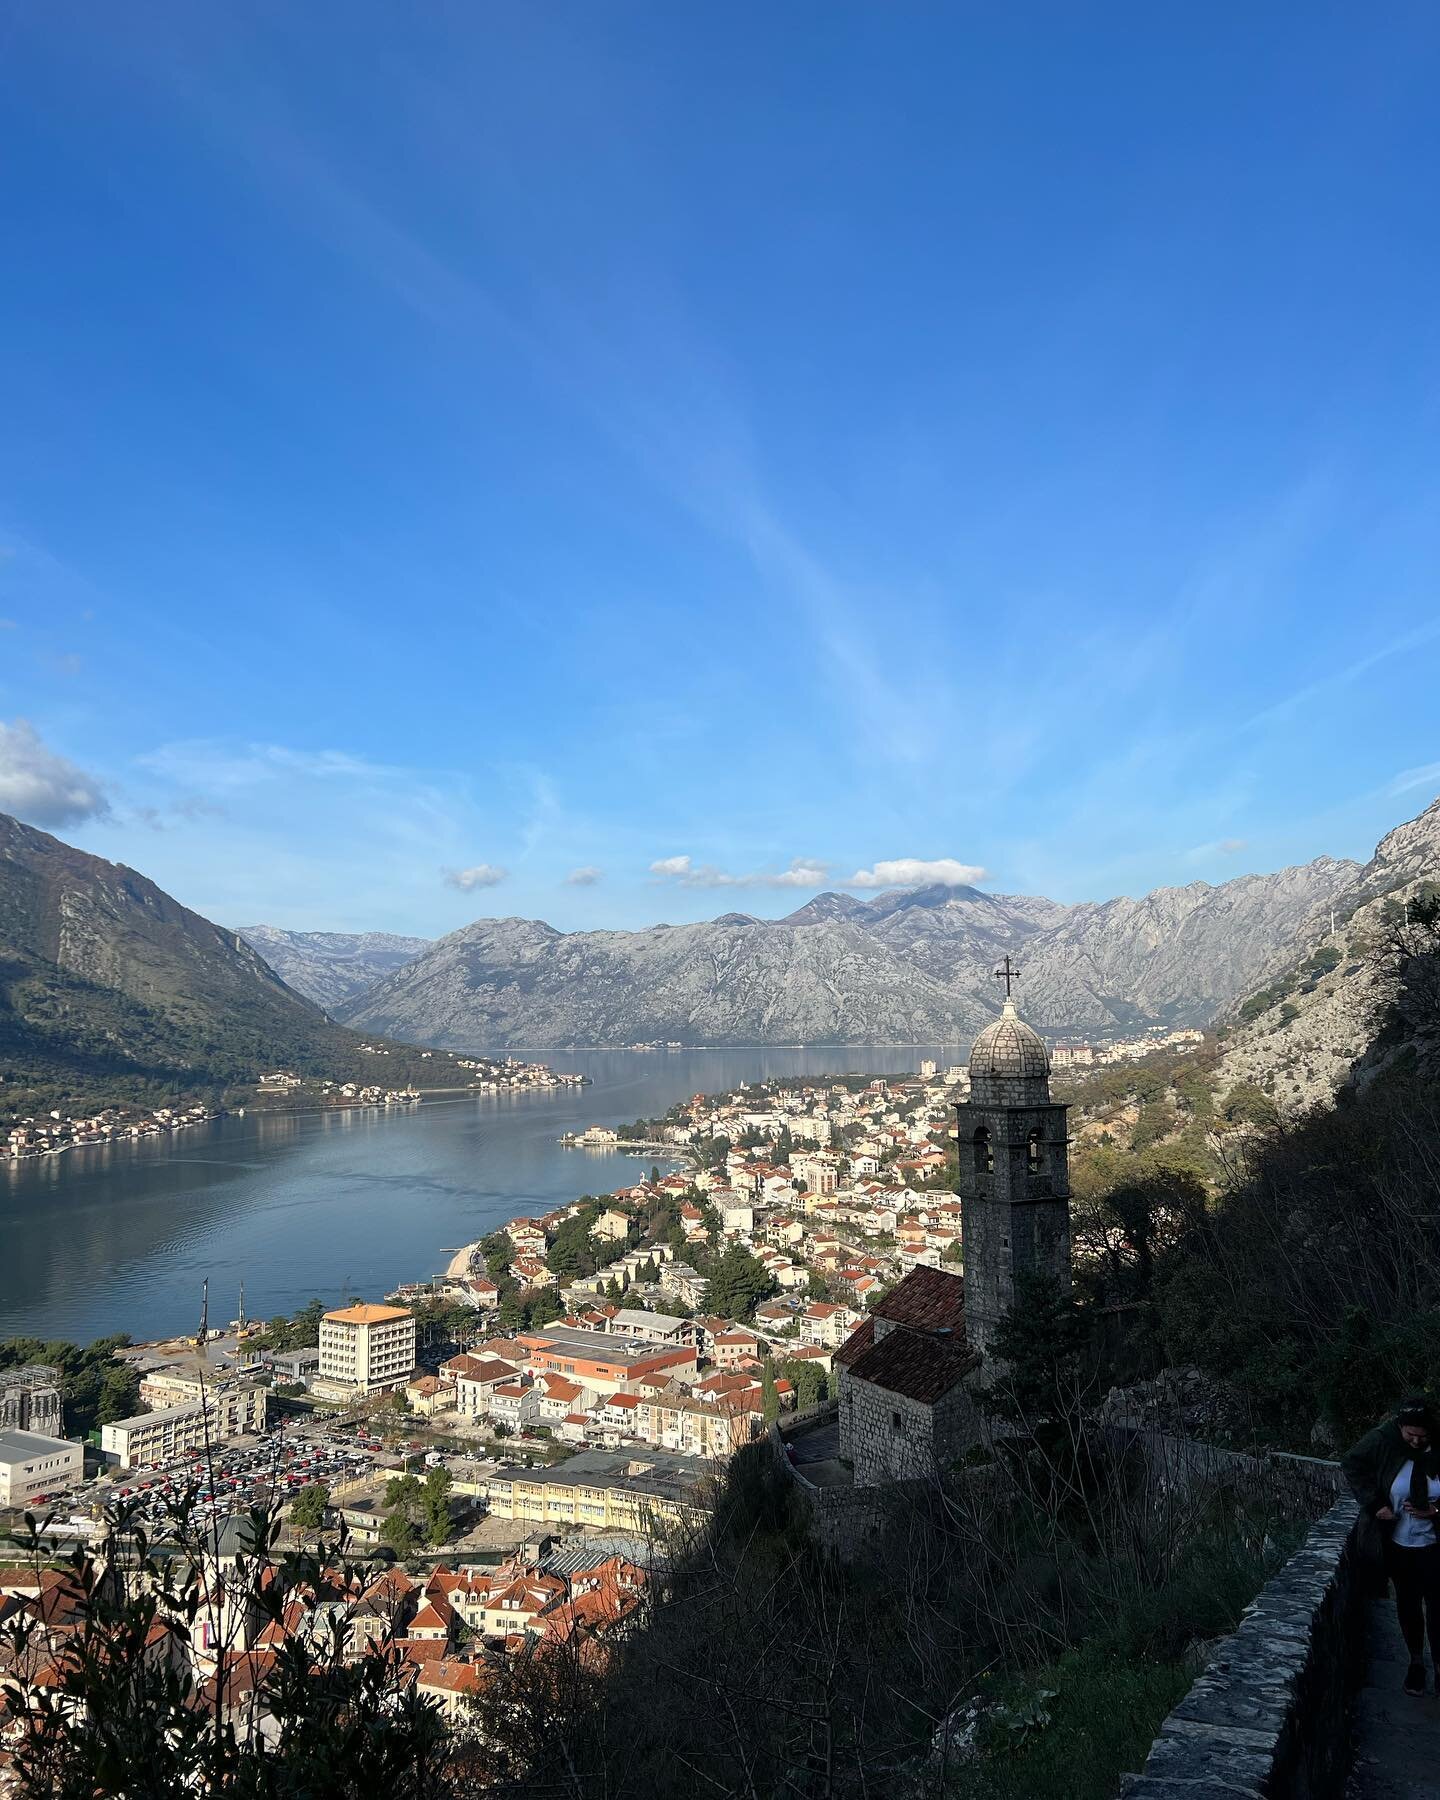 If you&rsquo;re visiting us this summer we certainly recommend spending a morning in Kotor and hiking up to the Old Fortress! It&rsquo;s well worth the challenge for an incredible view and you&rsquo;ll have earnt a cold drink when you get back down! 